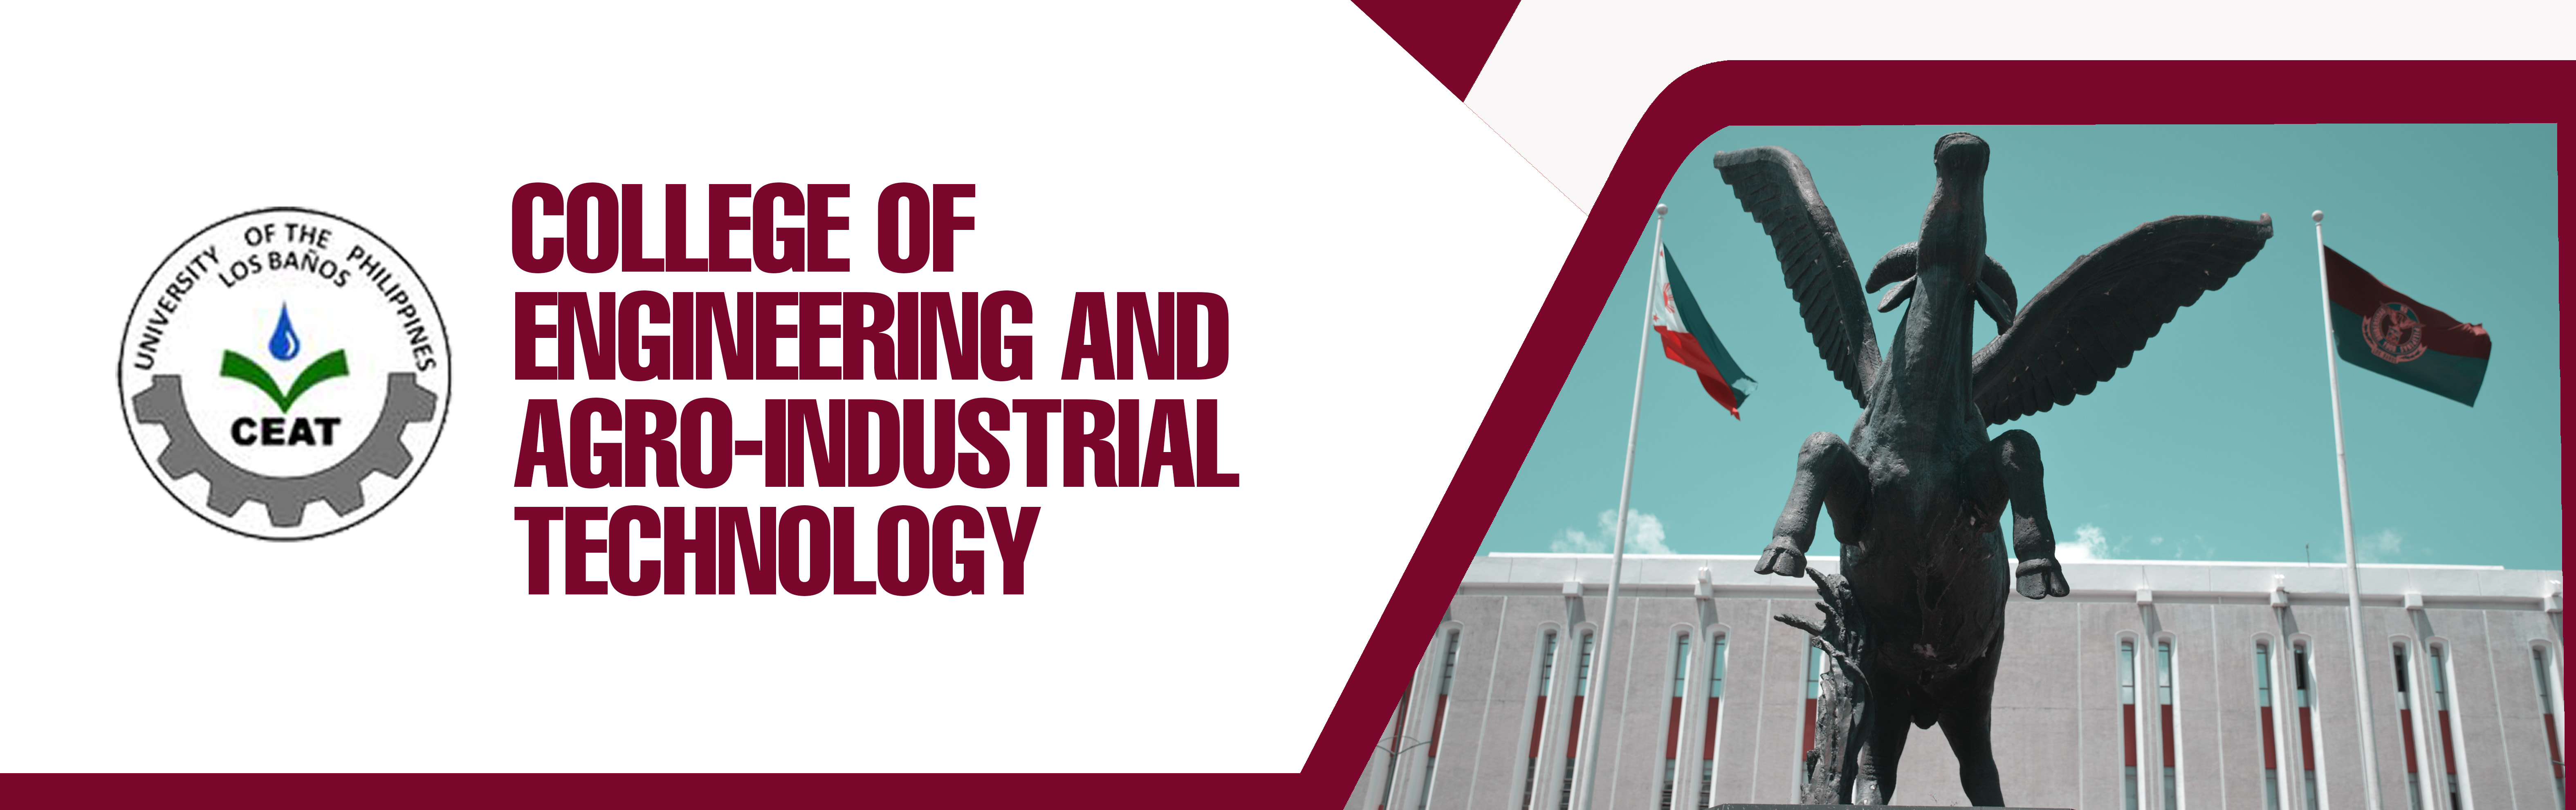 College of Engineering and Agro-Industrial Technology (CEAT)